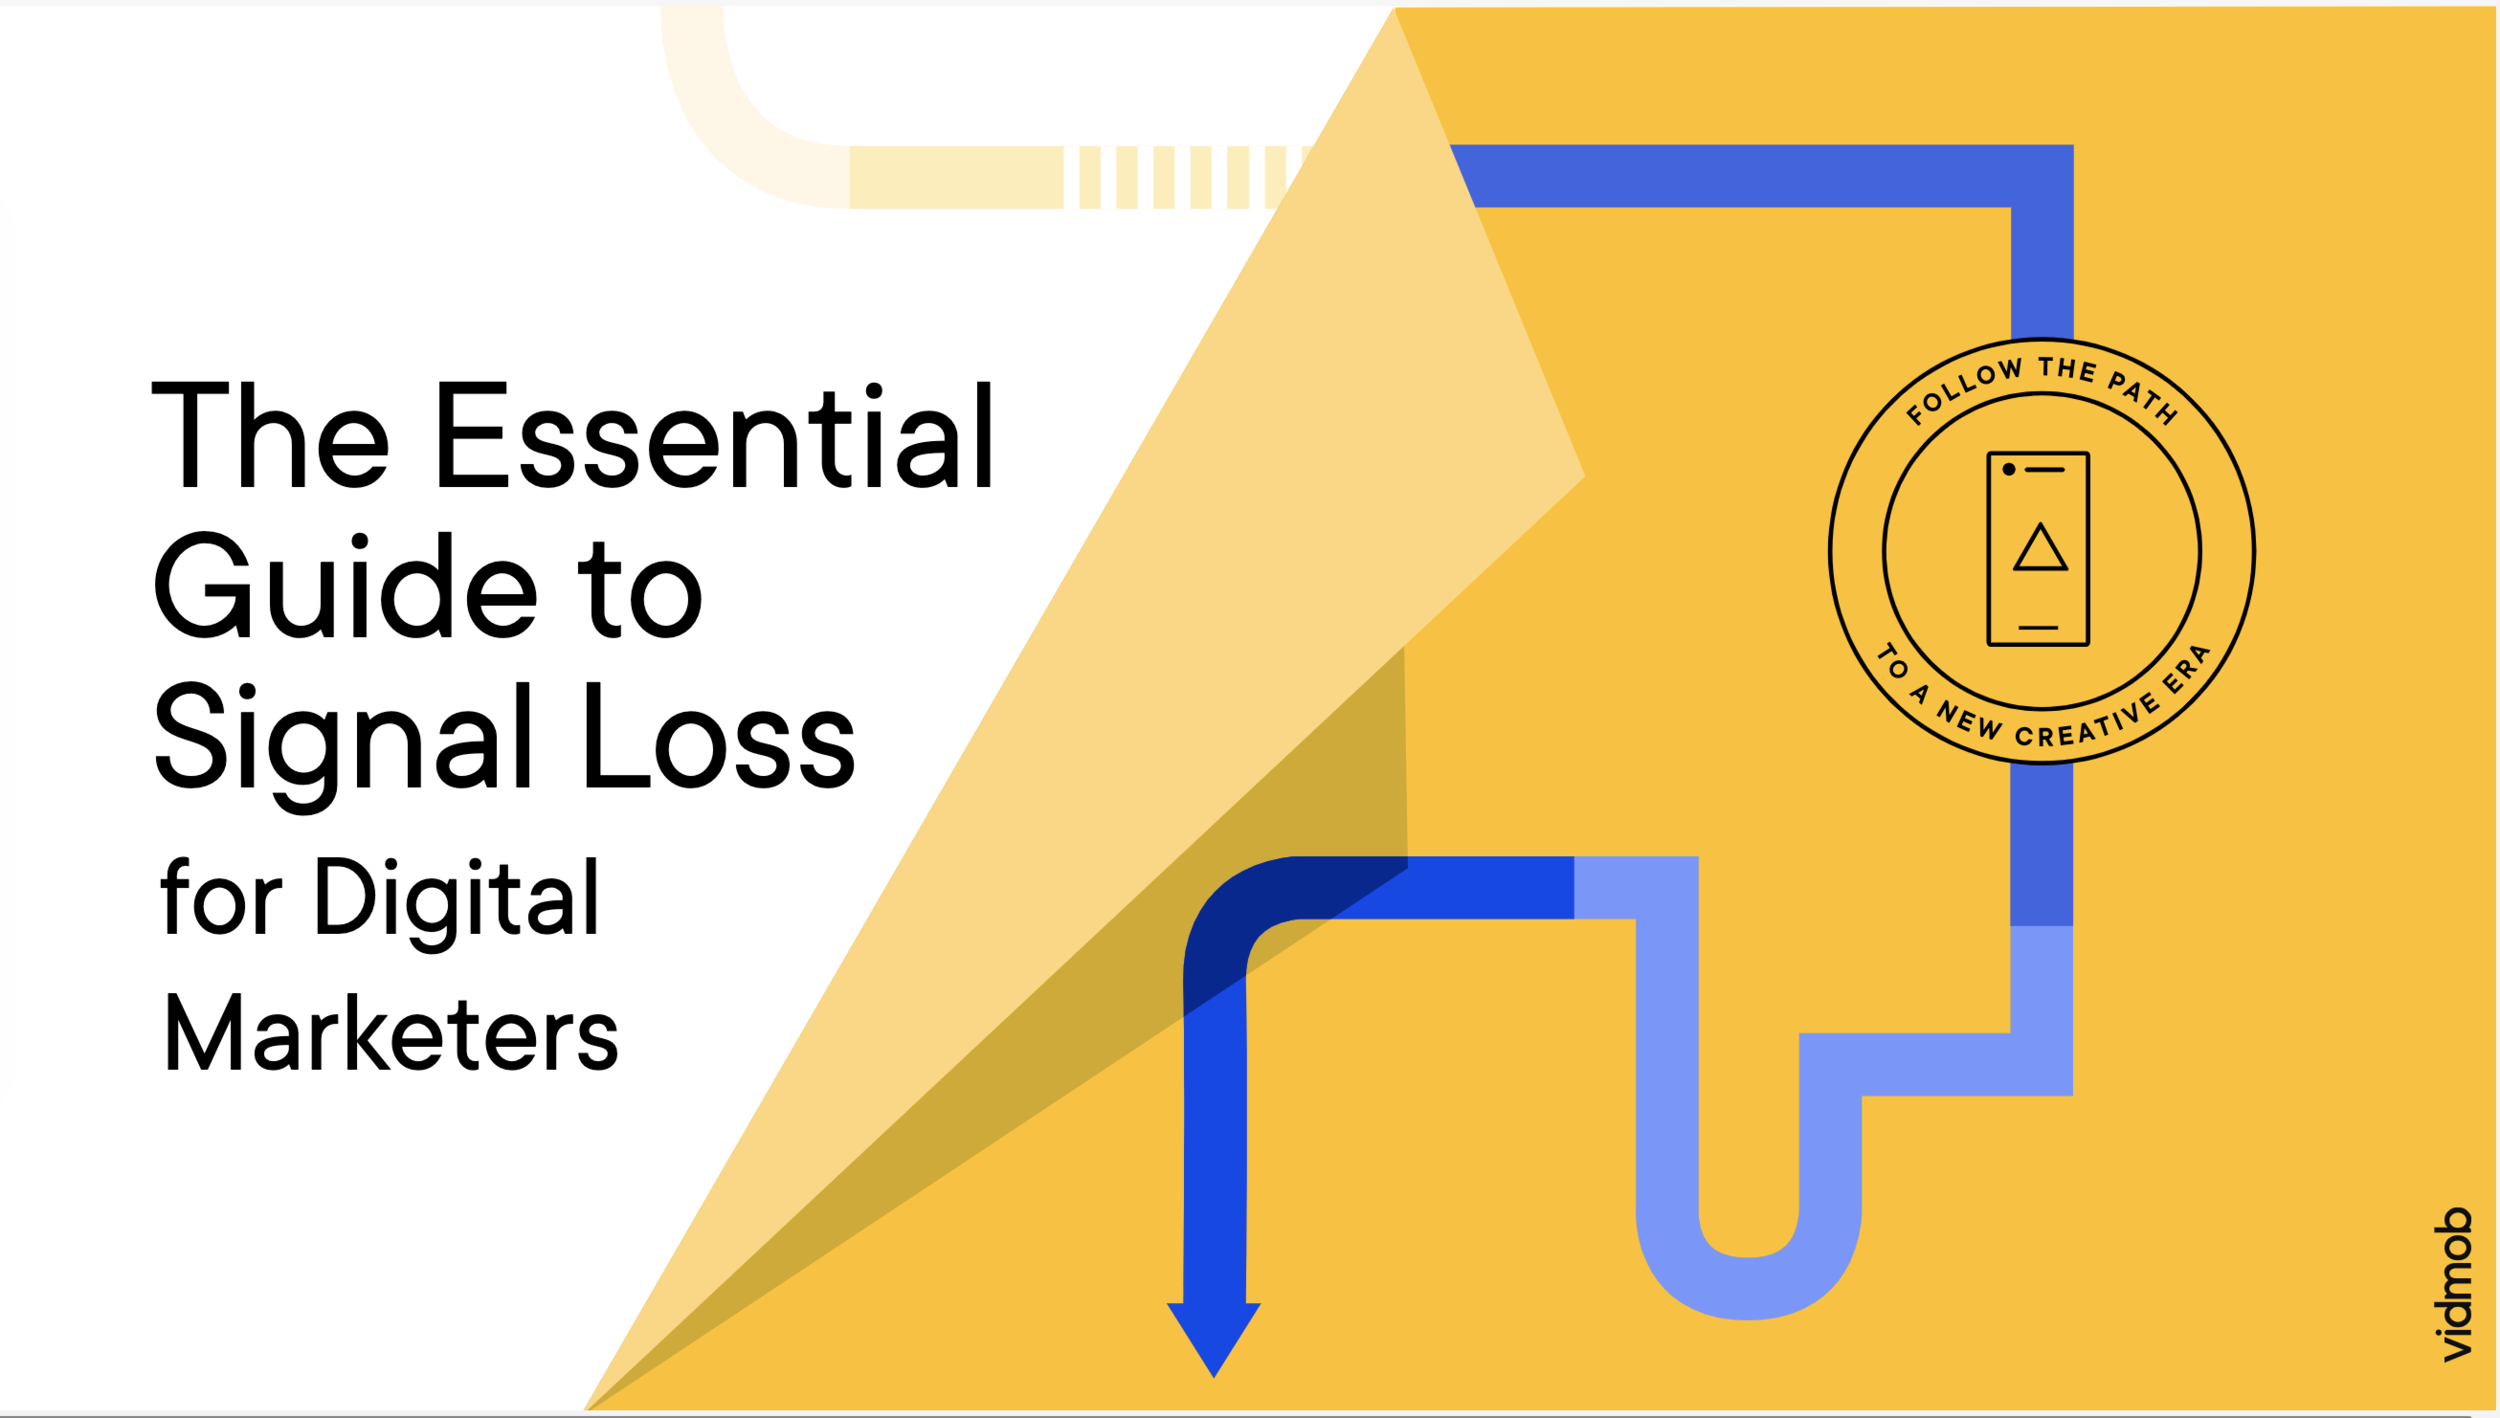 The Essential Guide to Signal Loss for Digital Marketers